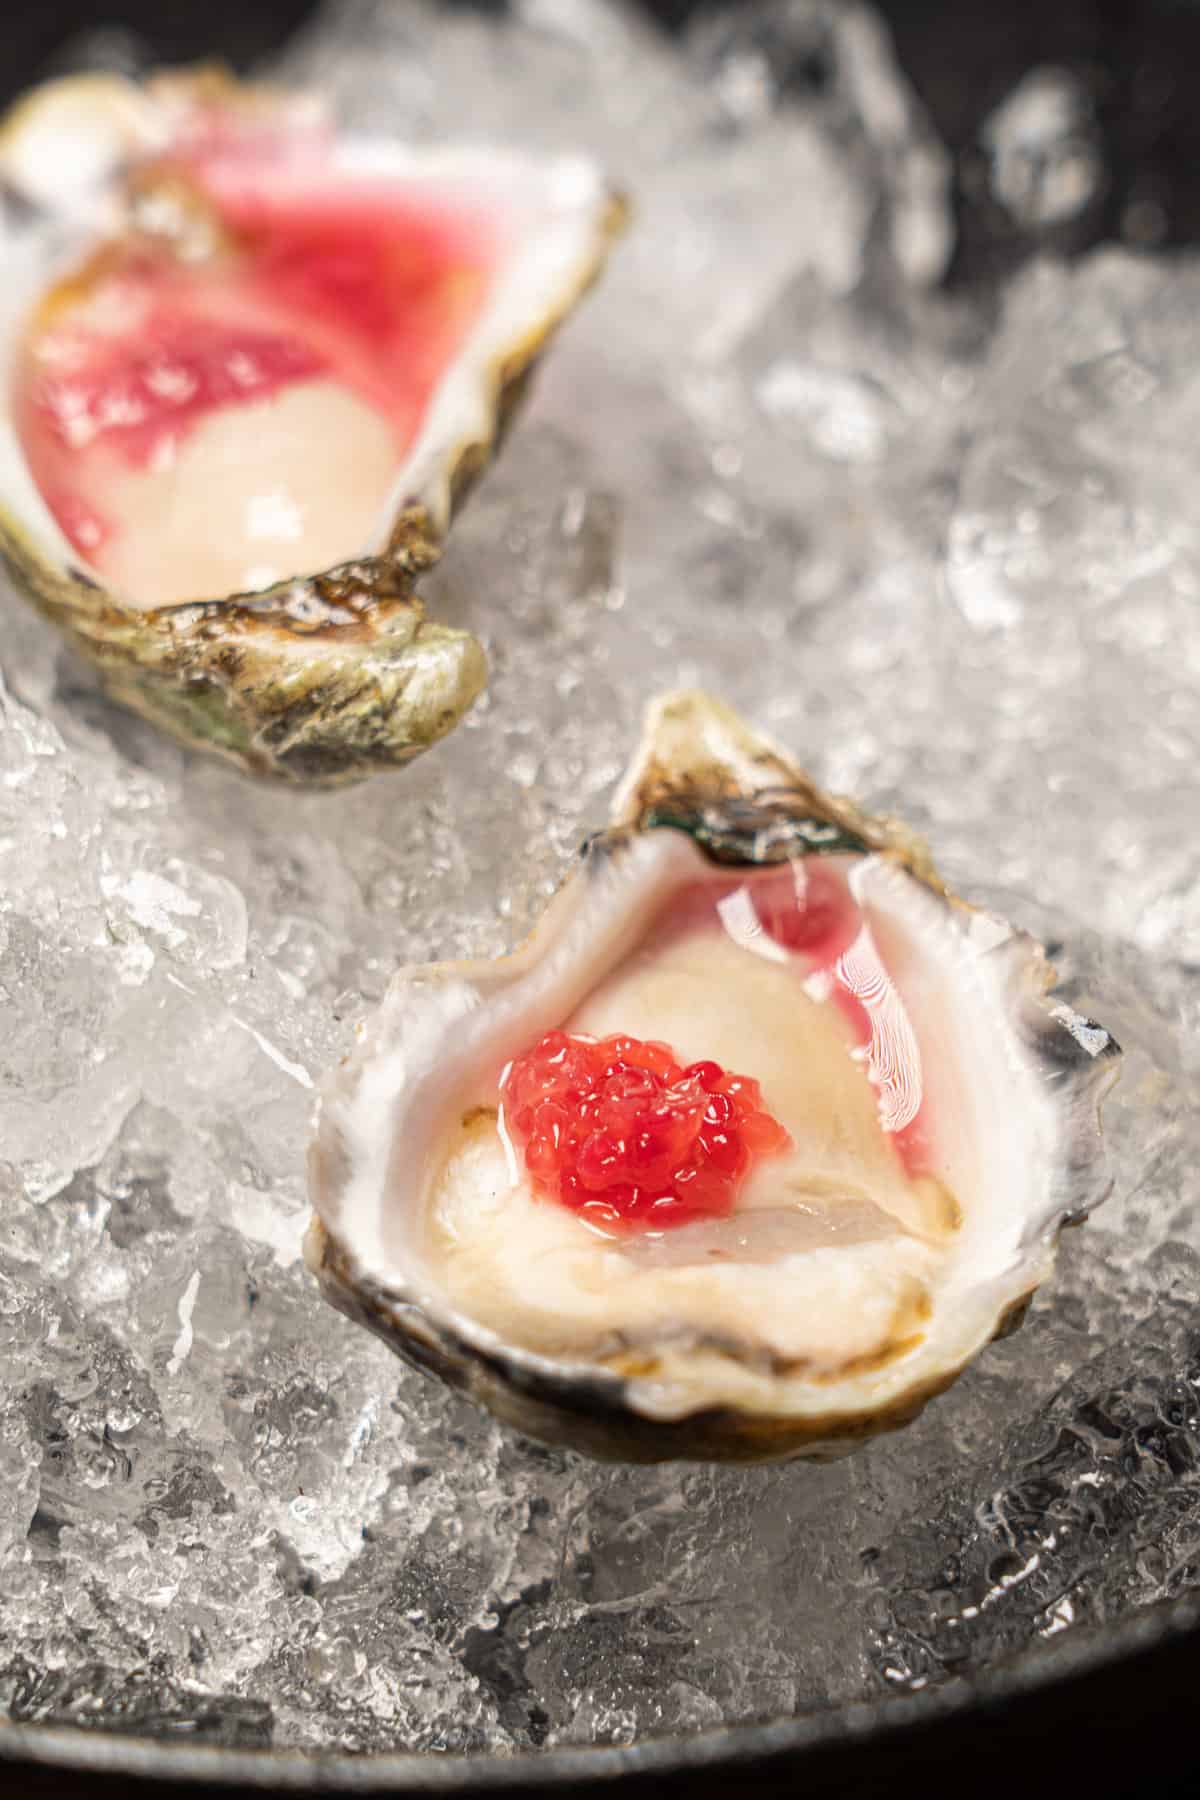 Oysters on ice